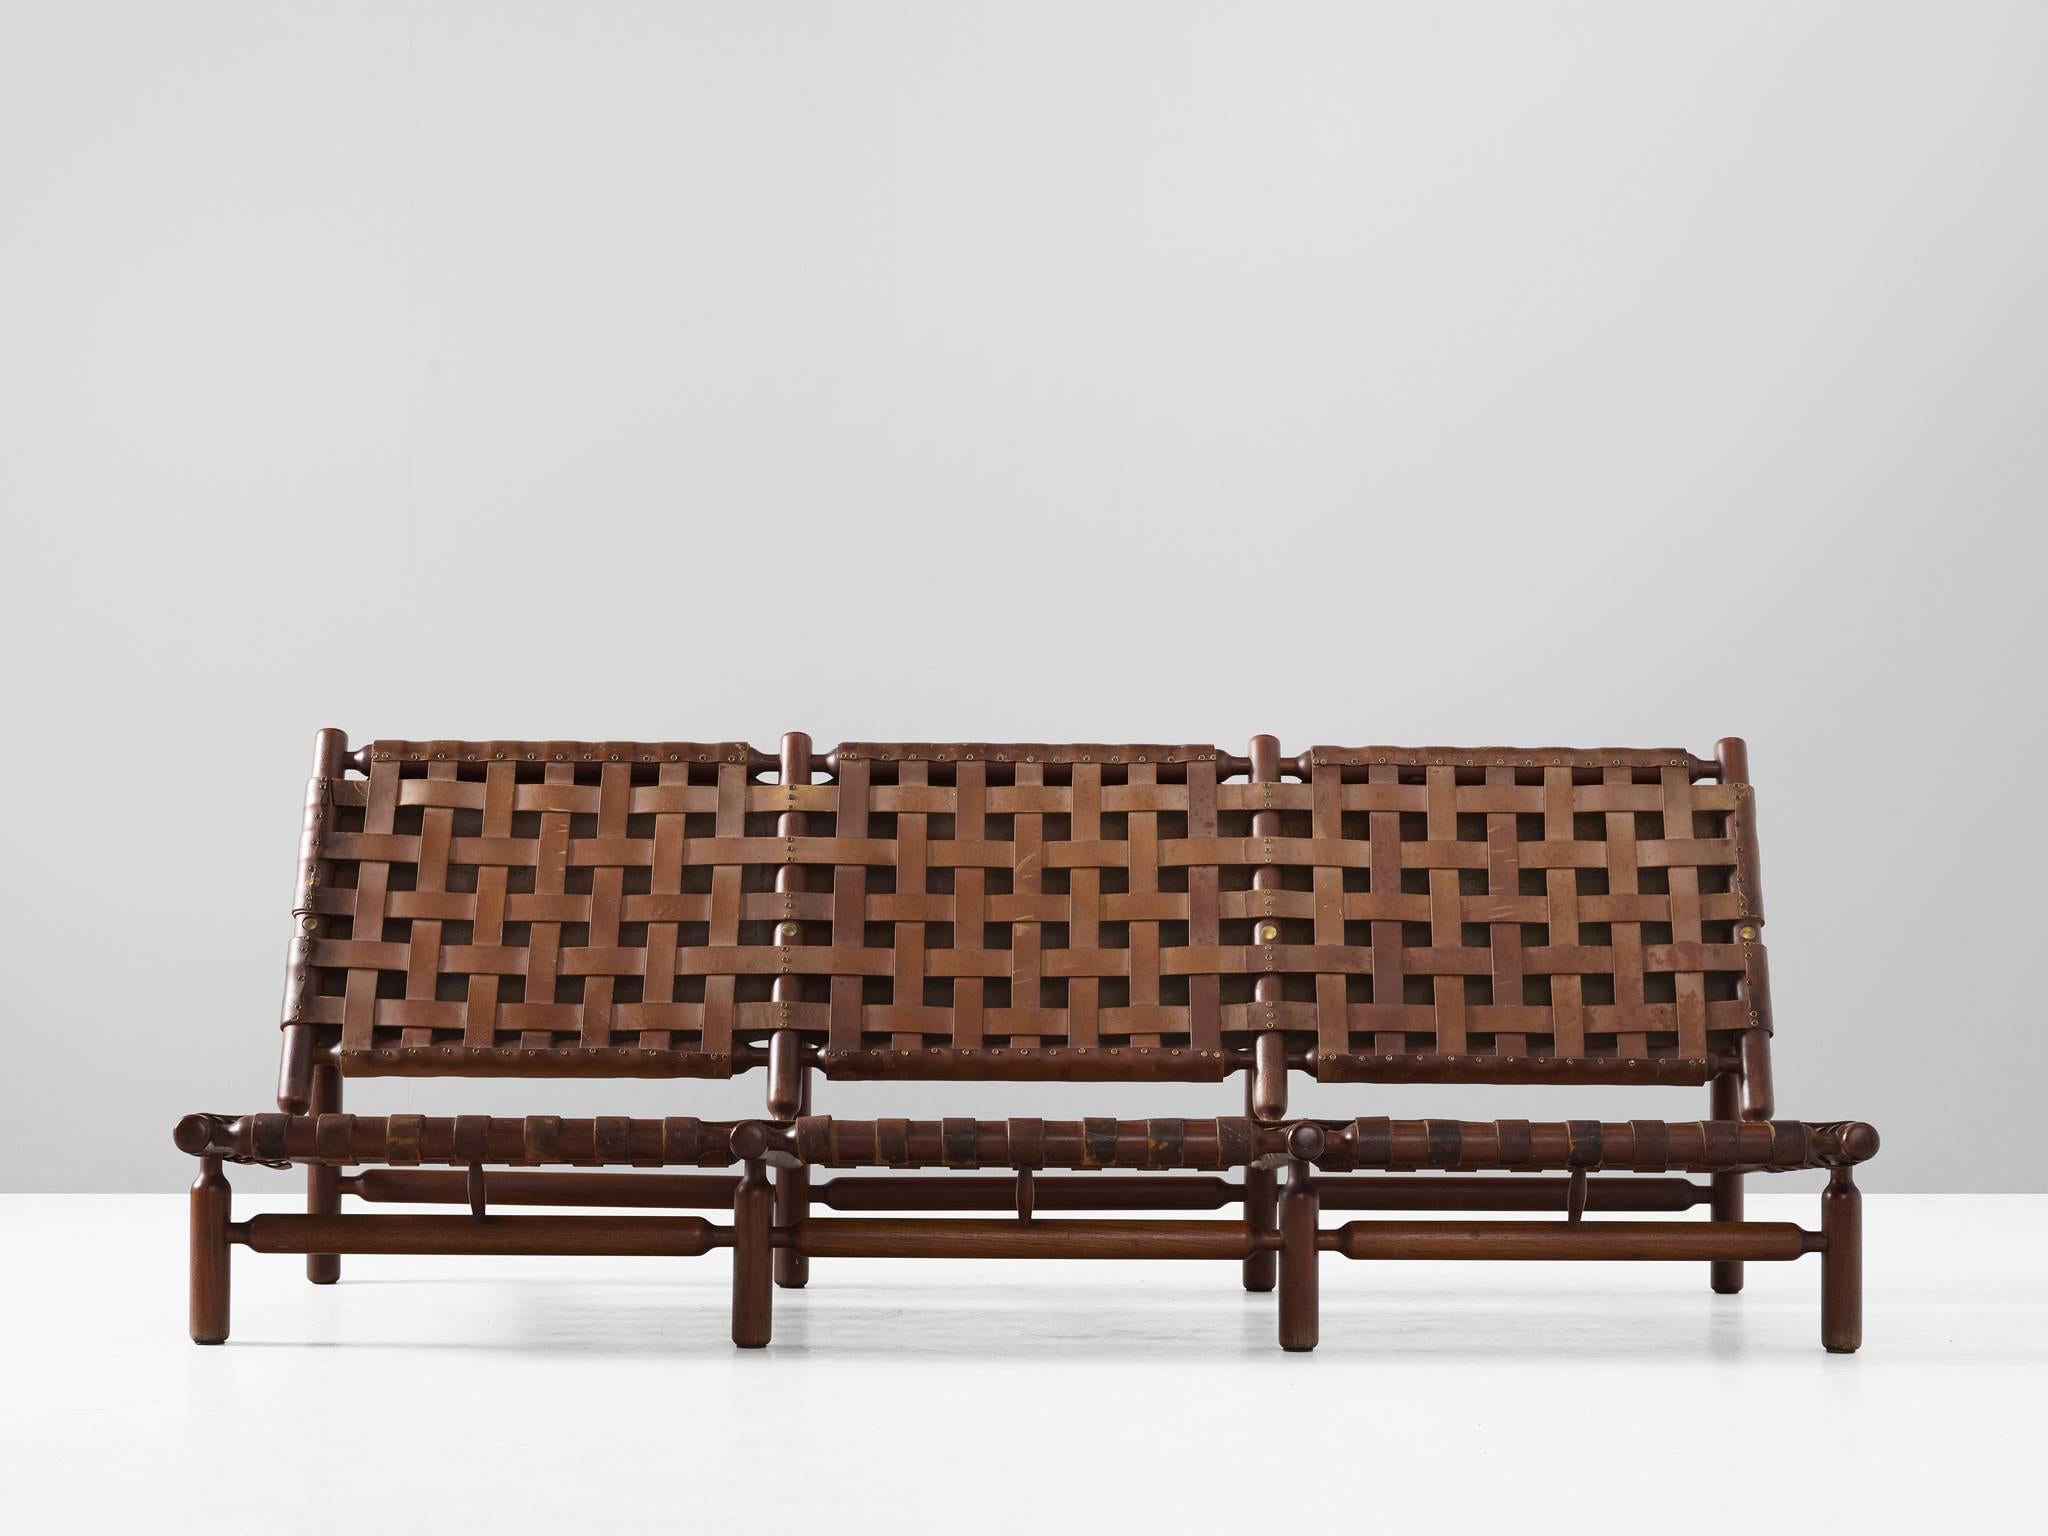 Sofa in teak and leather by Ilmari Tapiovaara for Esposizione La Permanente Mobili, Italy, 1957.

Rare three seat sofa by Finnish designer Ilmari Tapiovaara. This organic design features beautiful leather support strapping, which are an artwork in